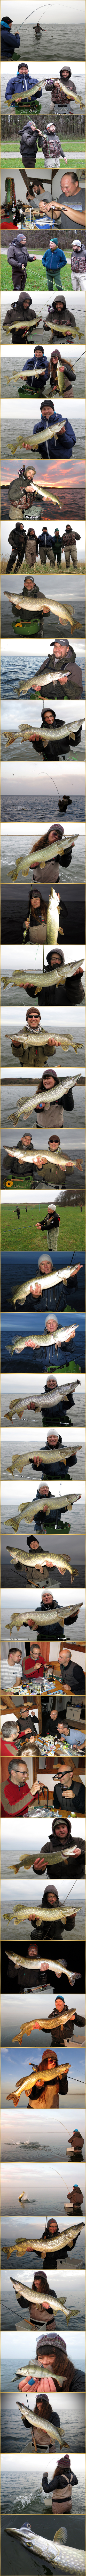 fly fishing for baltic pike